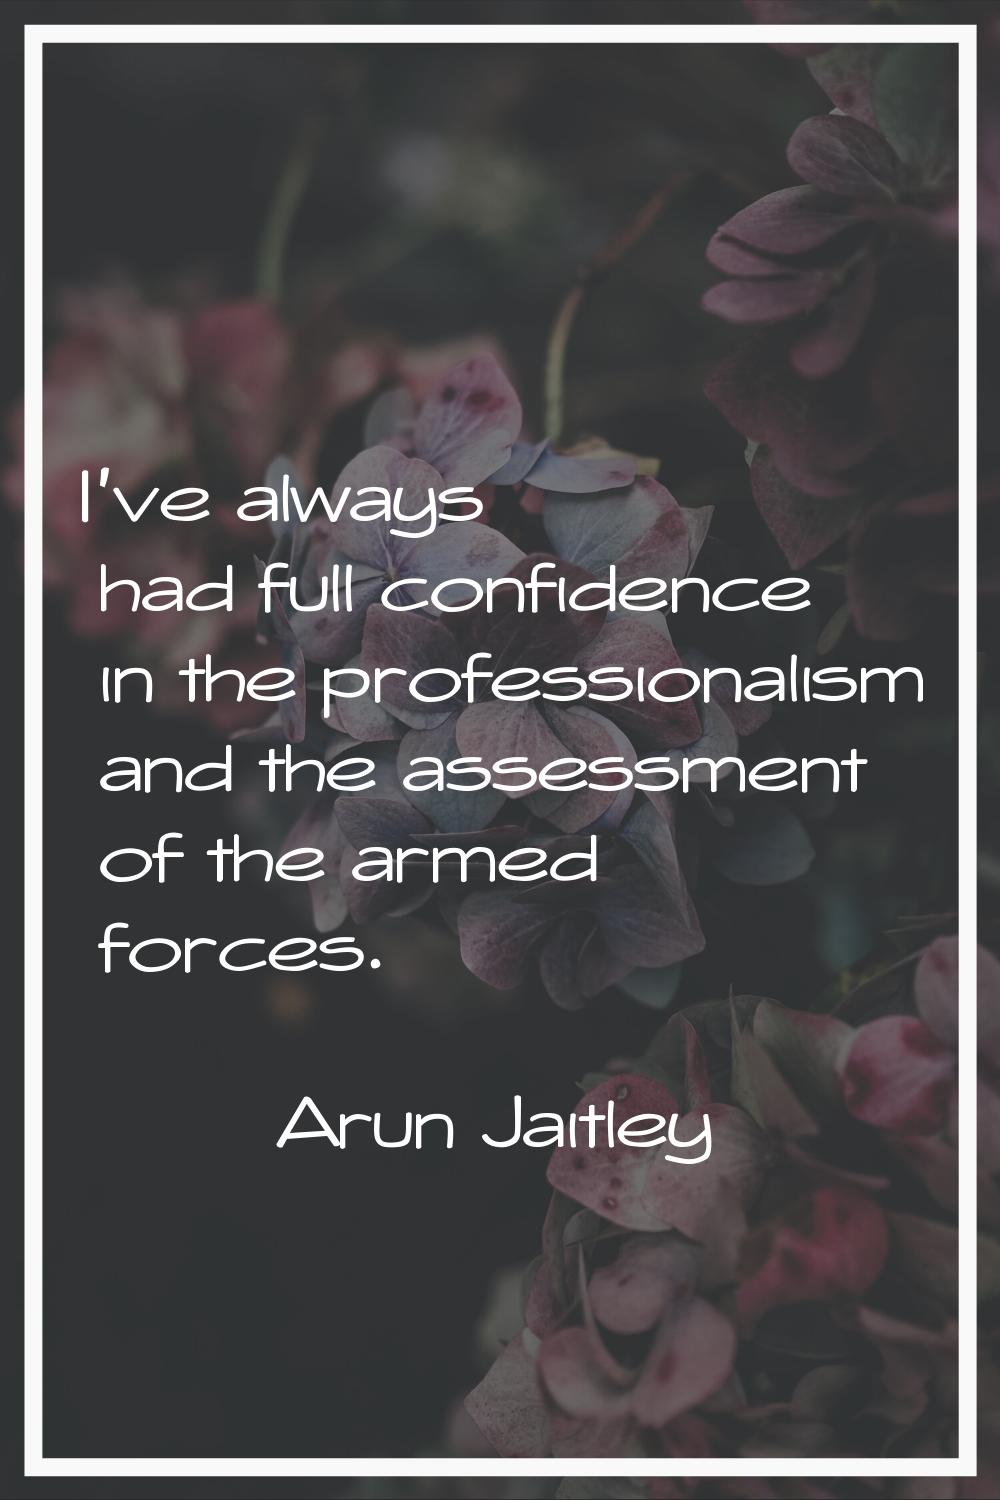 I've always had full confidence in the professionalism and the assessment of the armed forces.